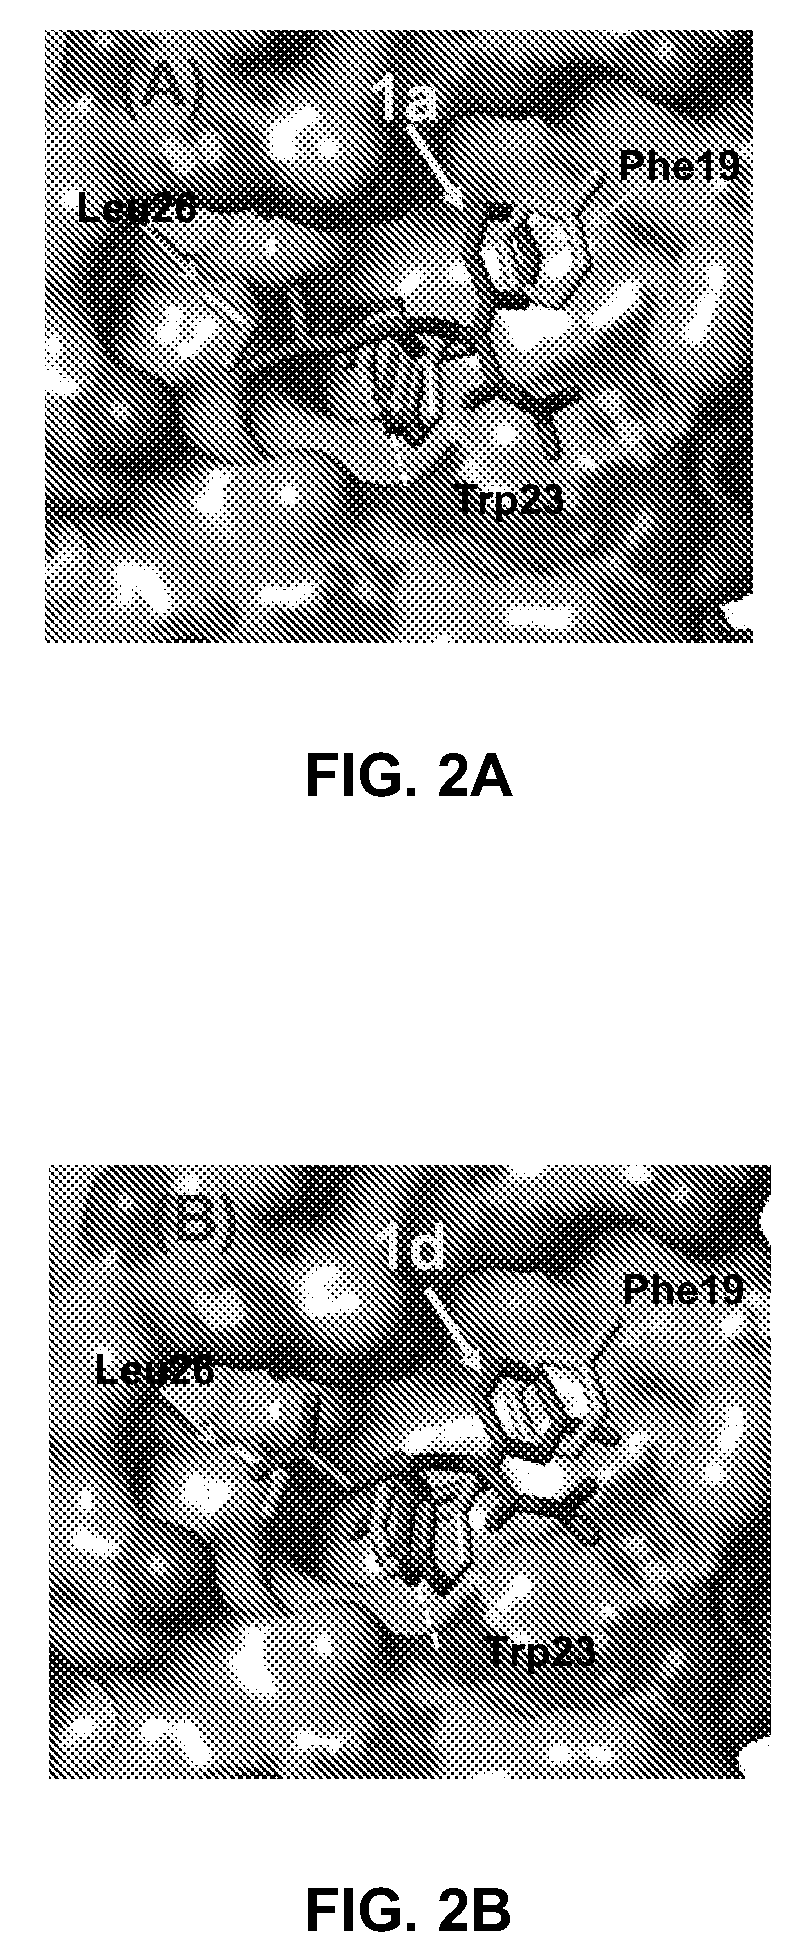 Small molecule inhibitors of MDM2 and the uses thereof